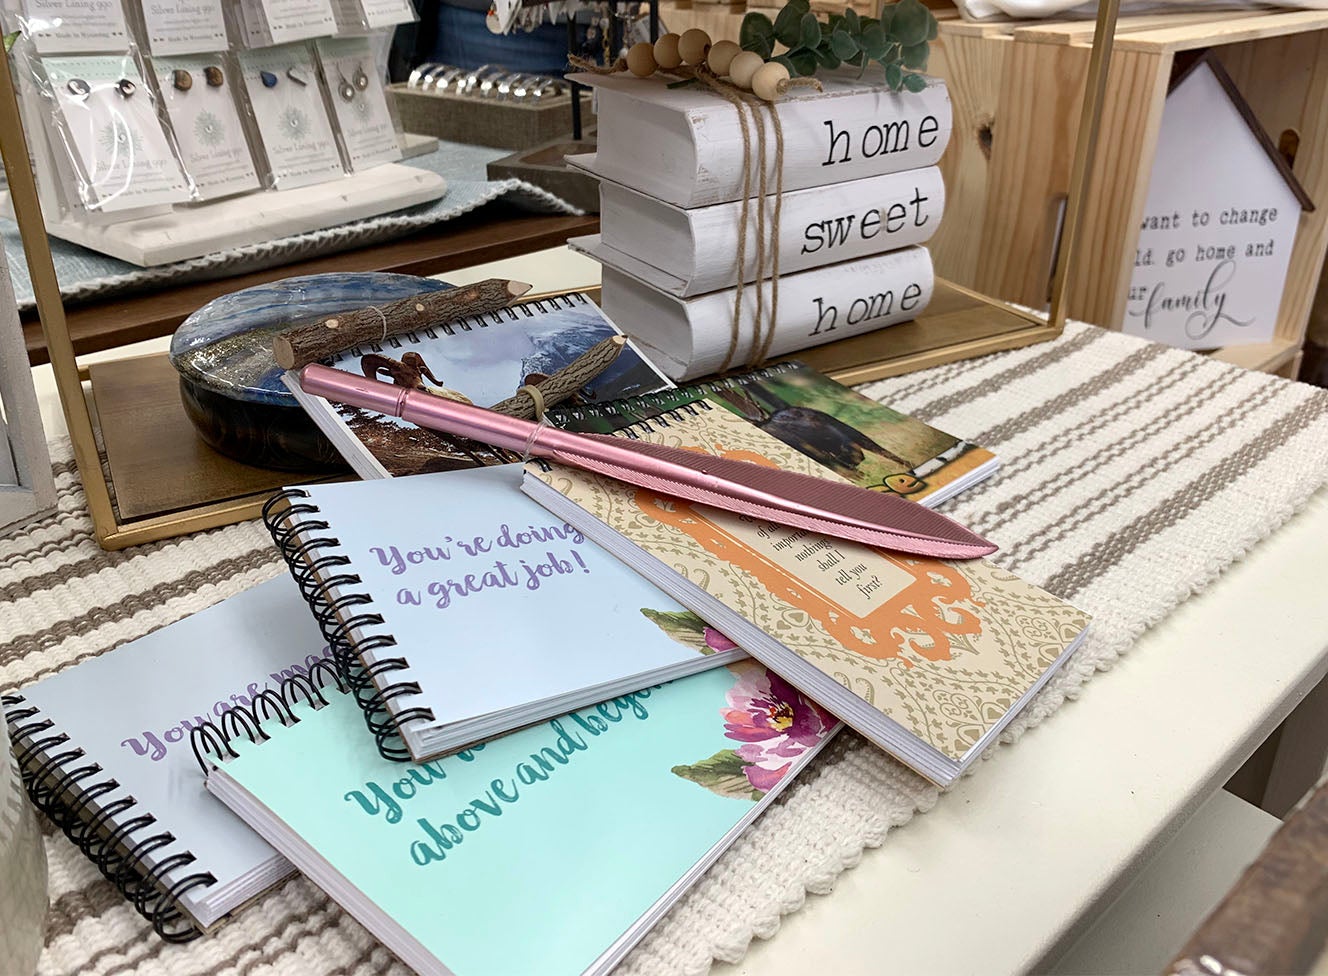 We have notebooks, greeting cards, calendars, journals, and even pens for sale.